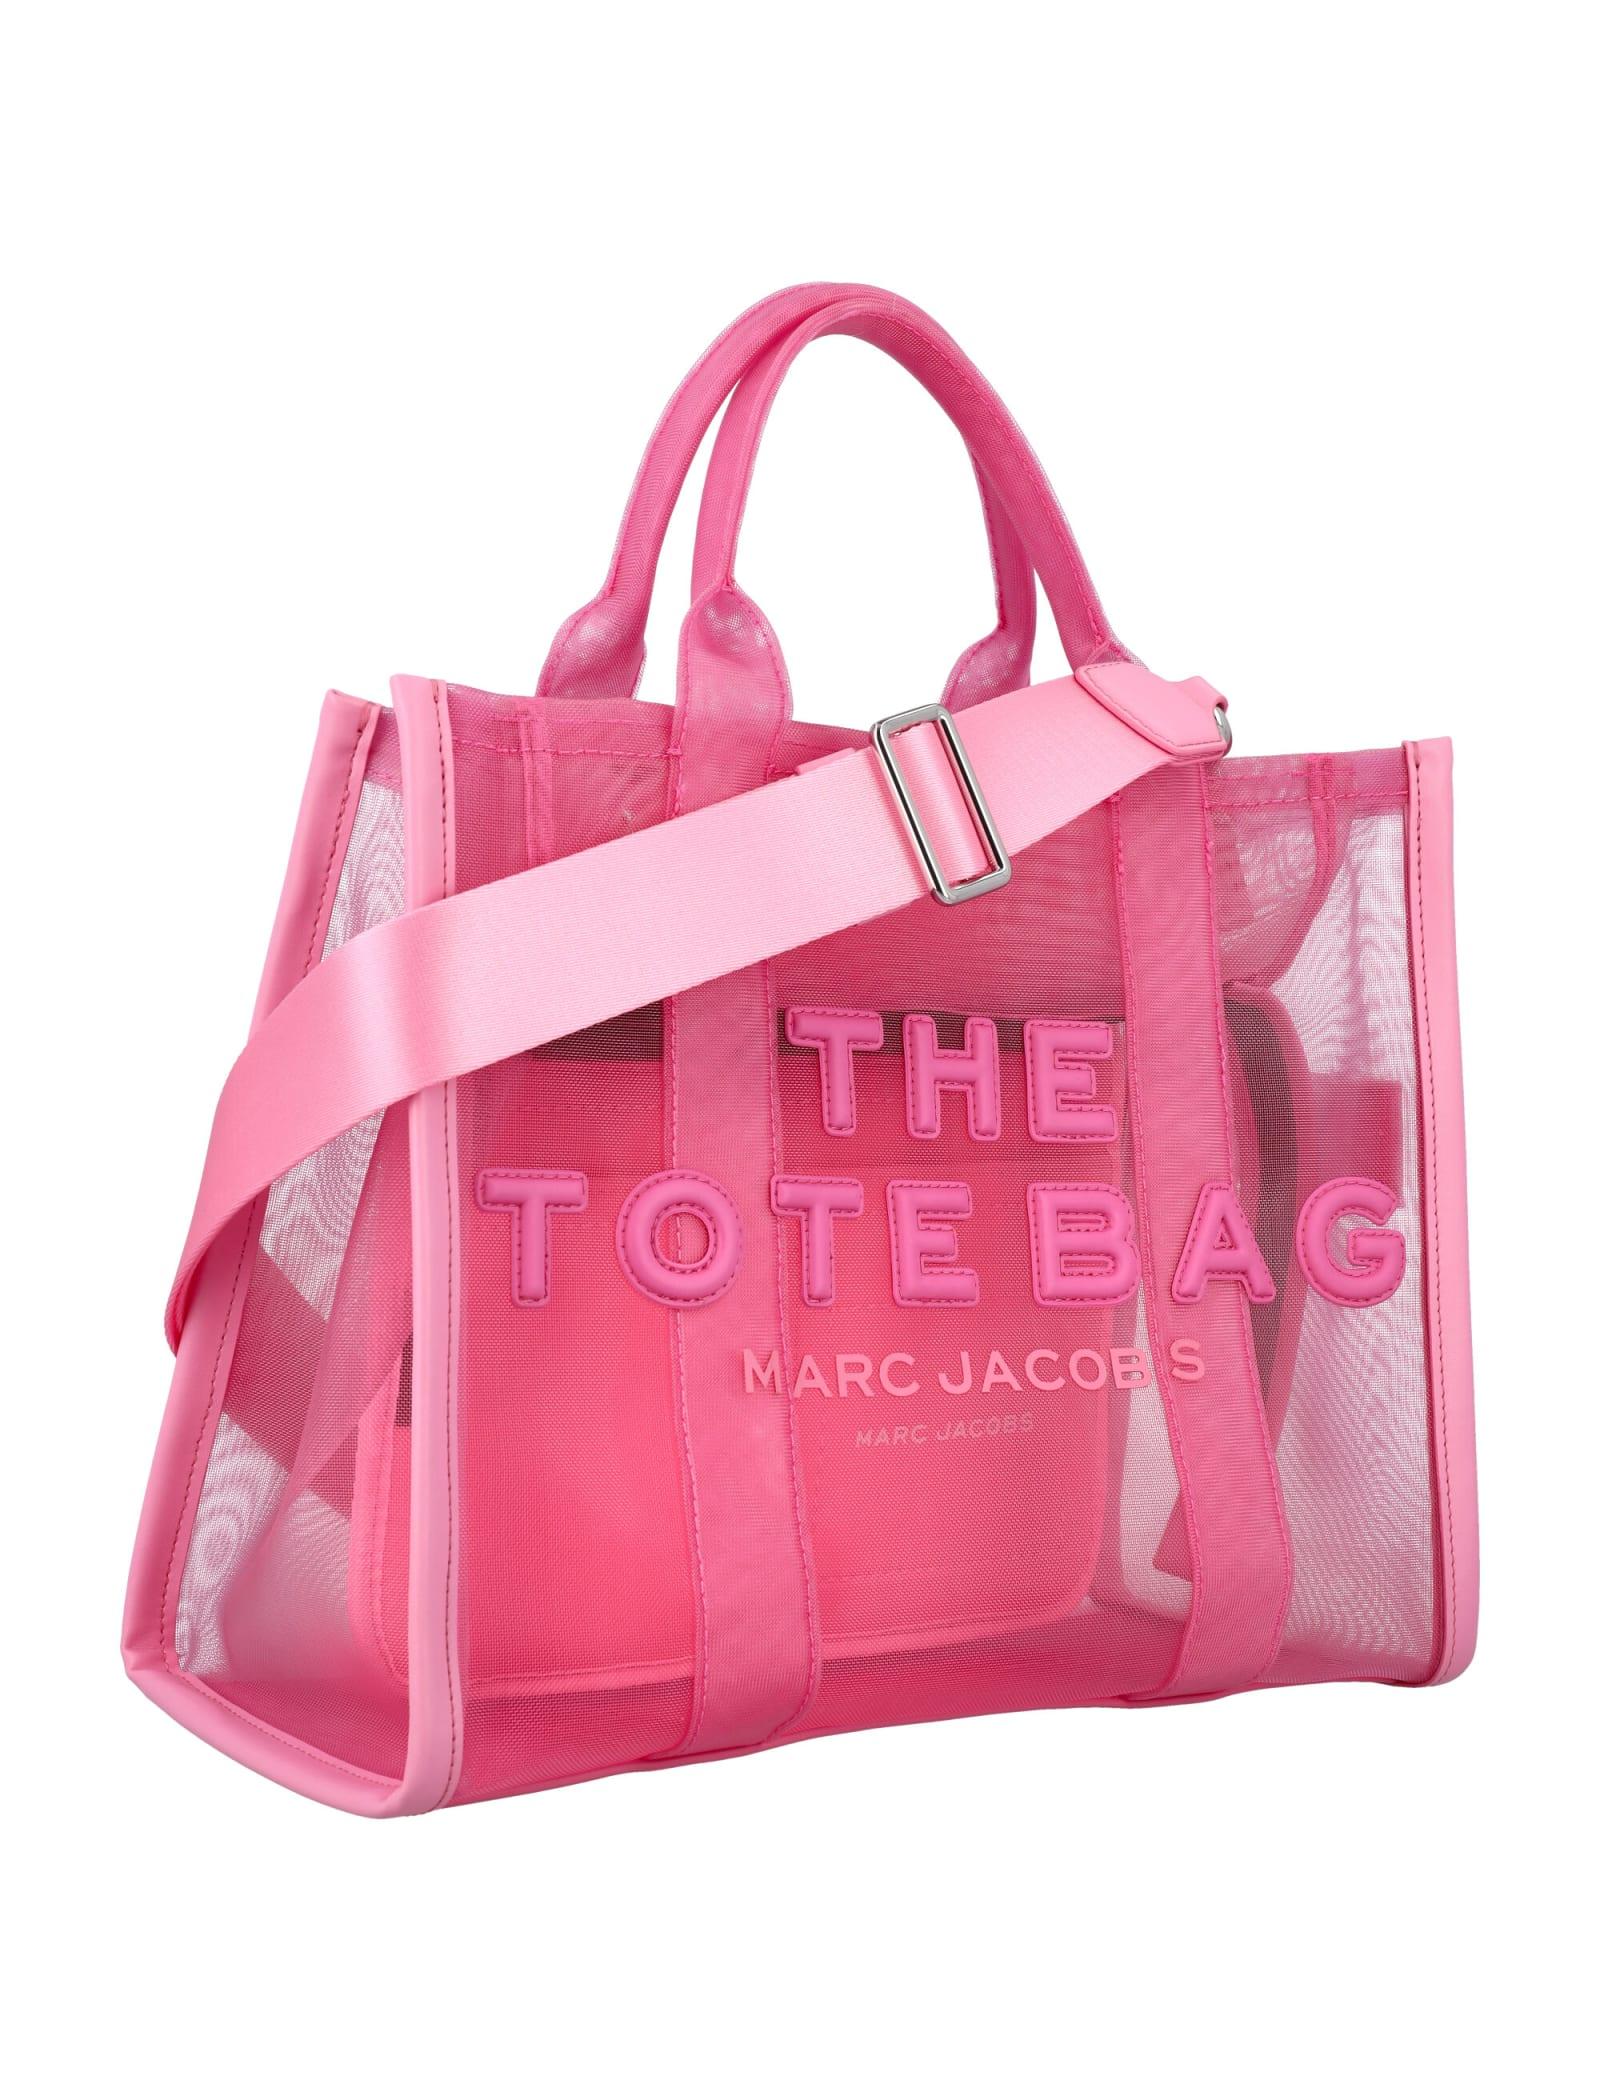 Marc Jacobs The Medium Tote Bag in Pink